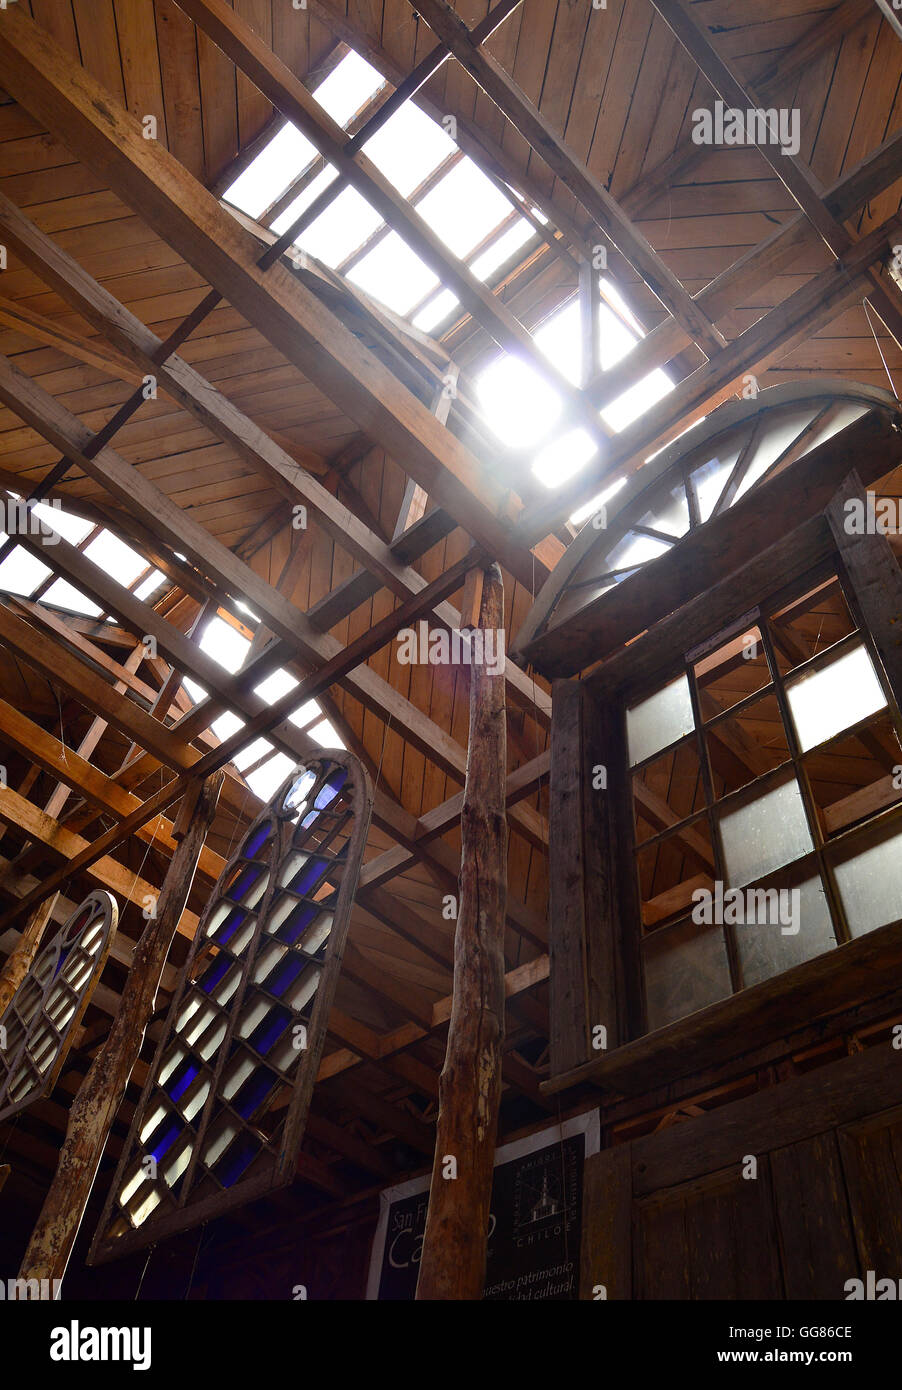 Stained glass windows and high wooden beams in an exhibit at the Museo de las Iglesias de Chiloe, Ancud, Chile. Stock Photo